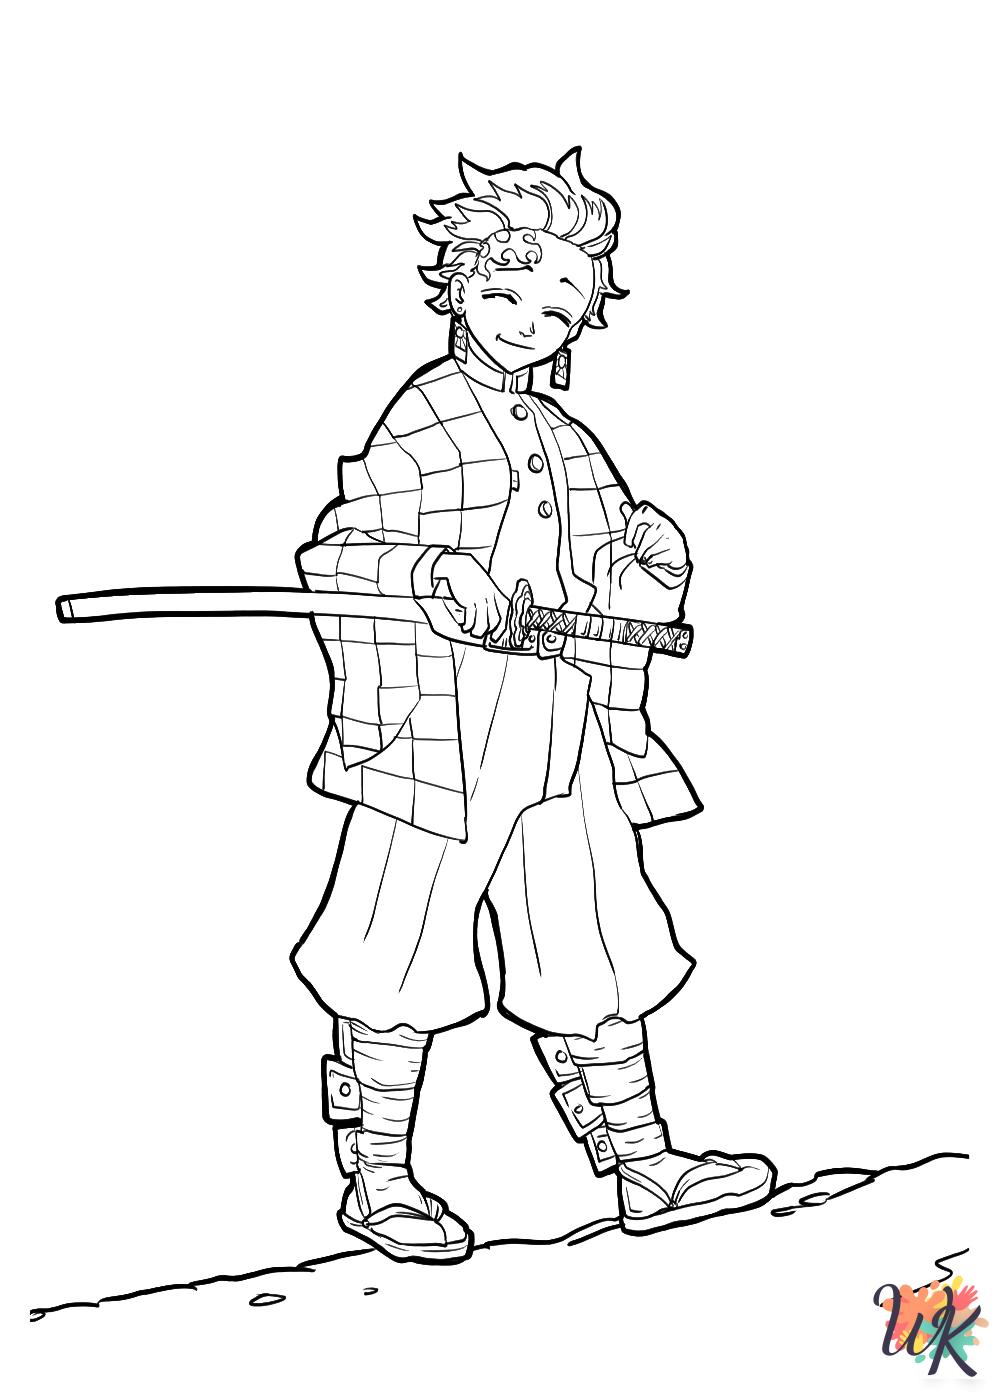 merry Demon Slayer coloring pages